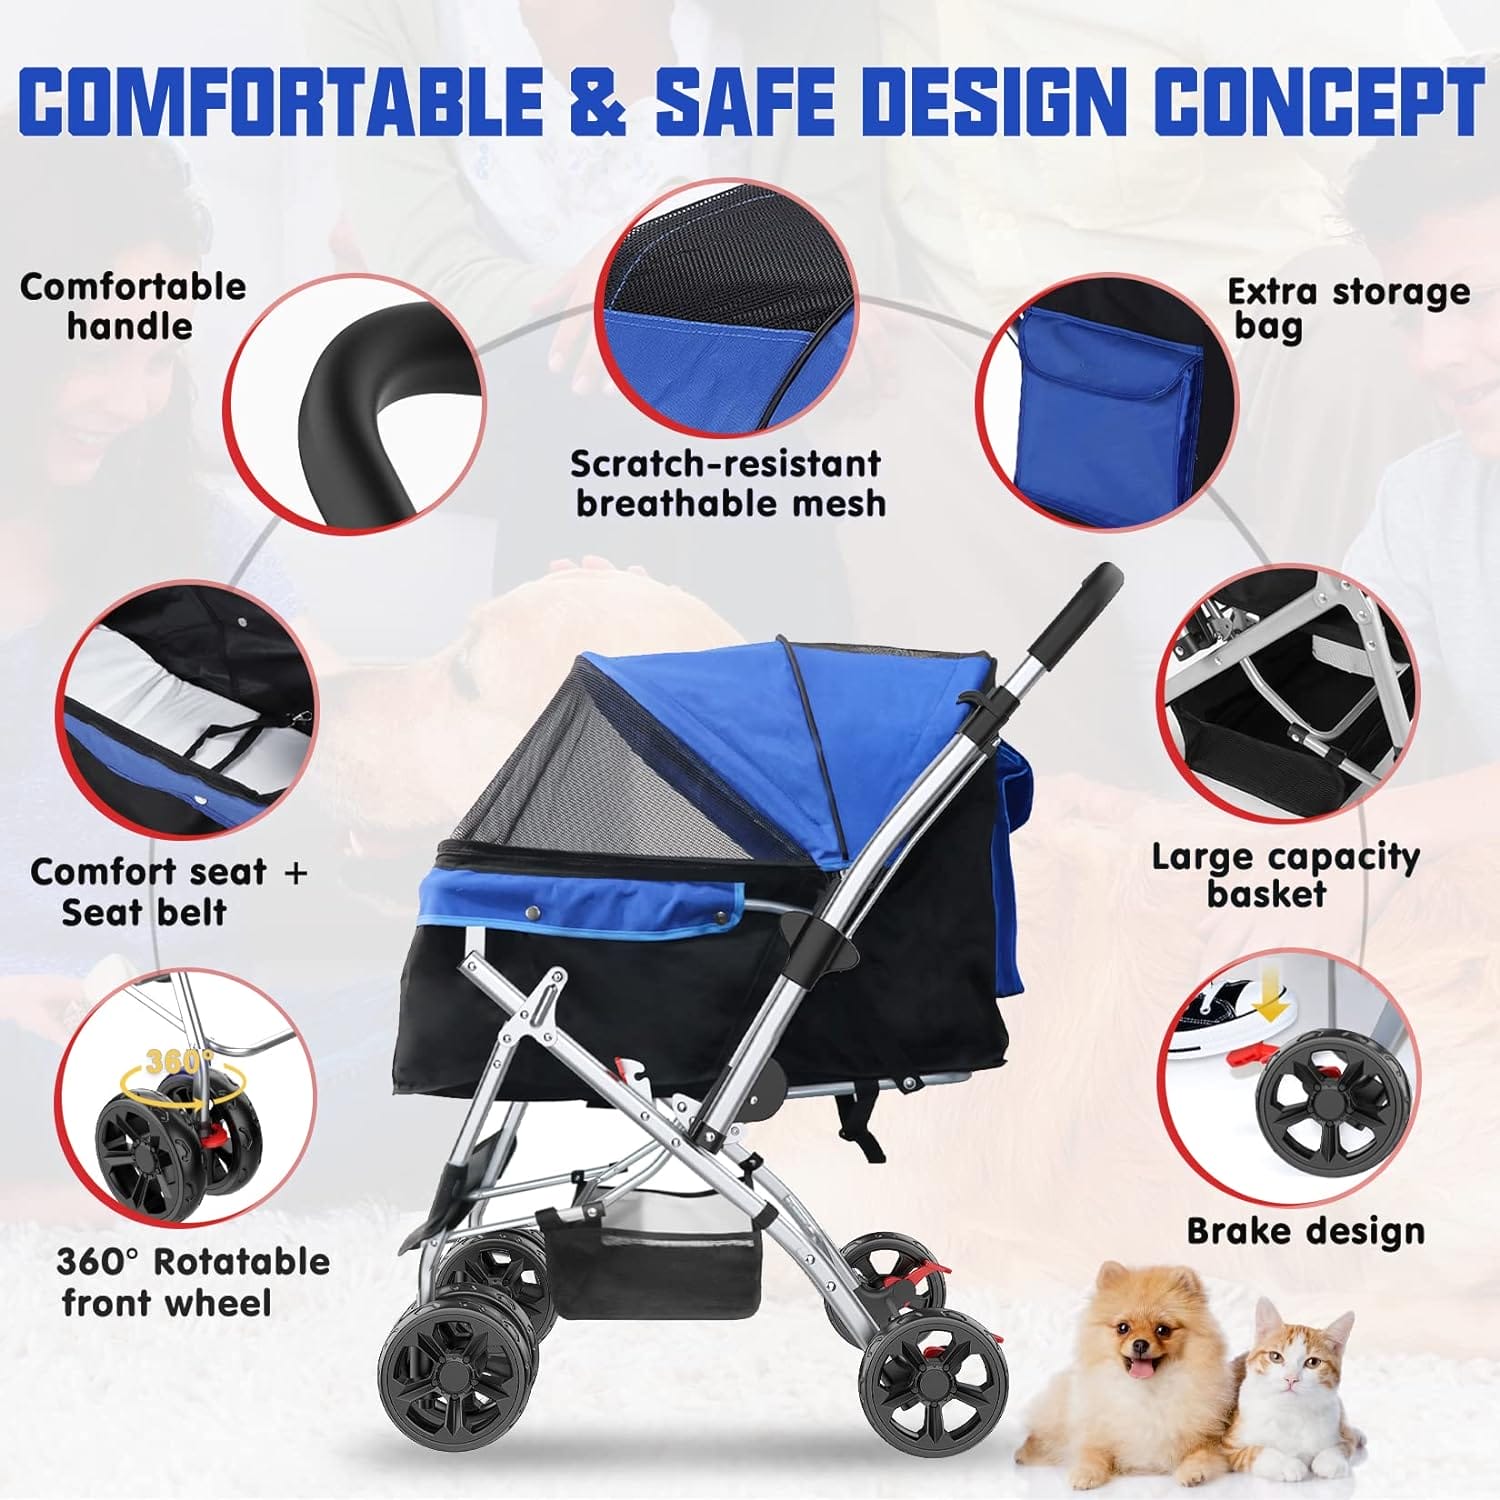 Idota Dogs Stroller Review